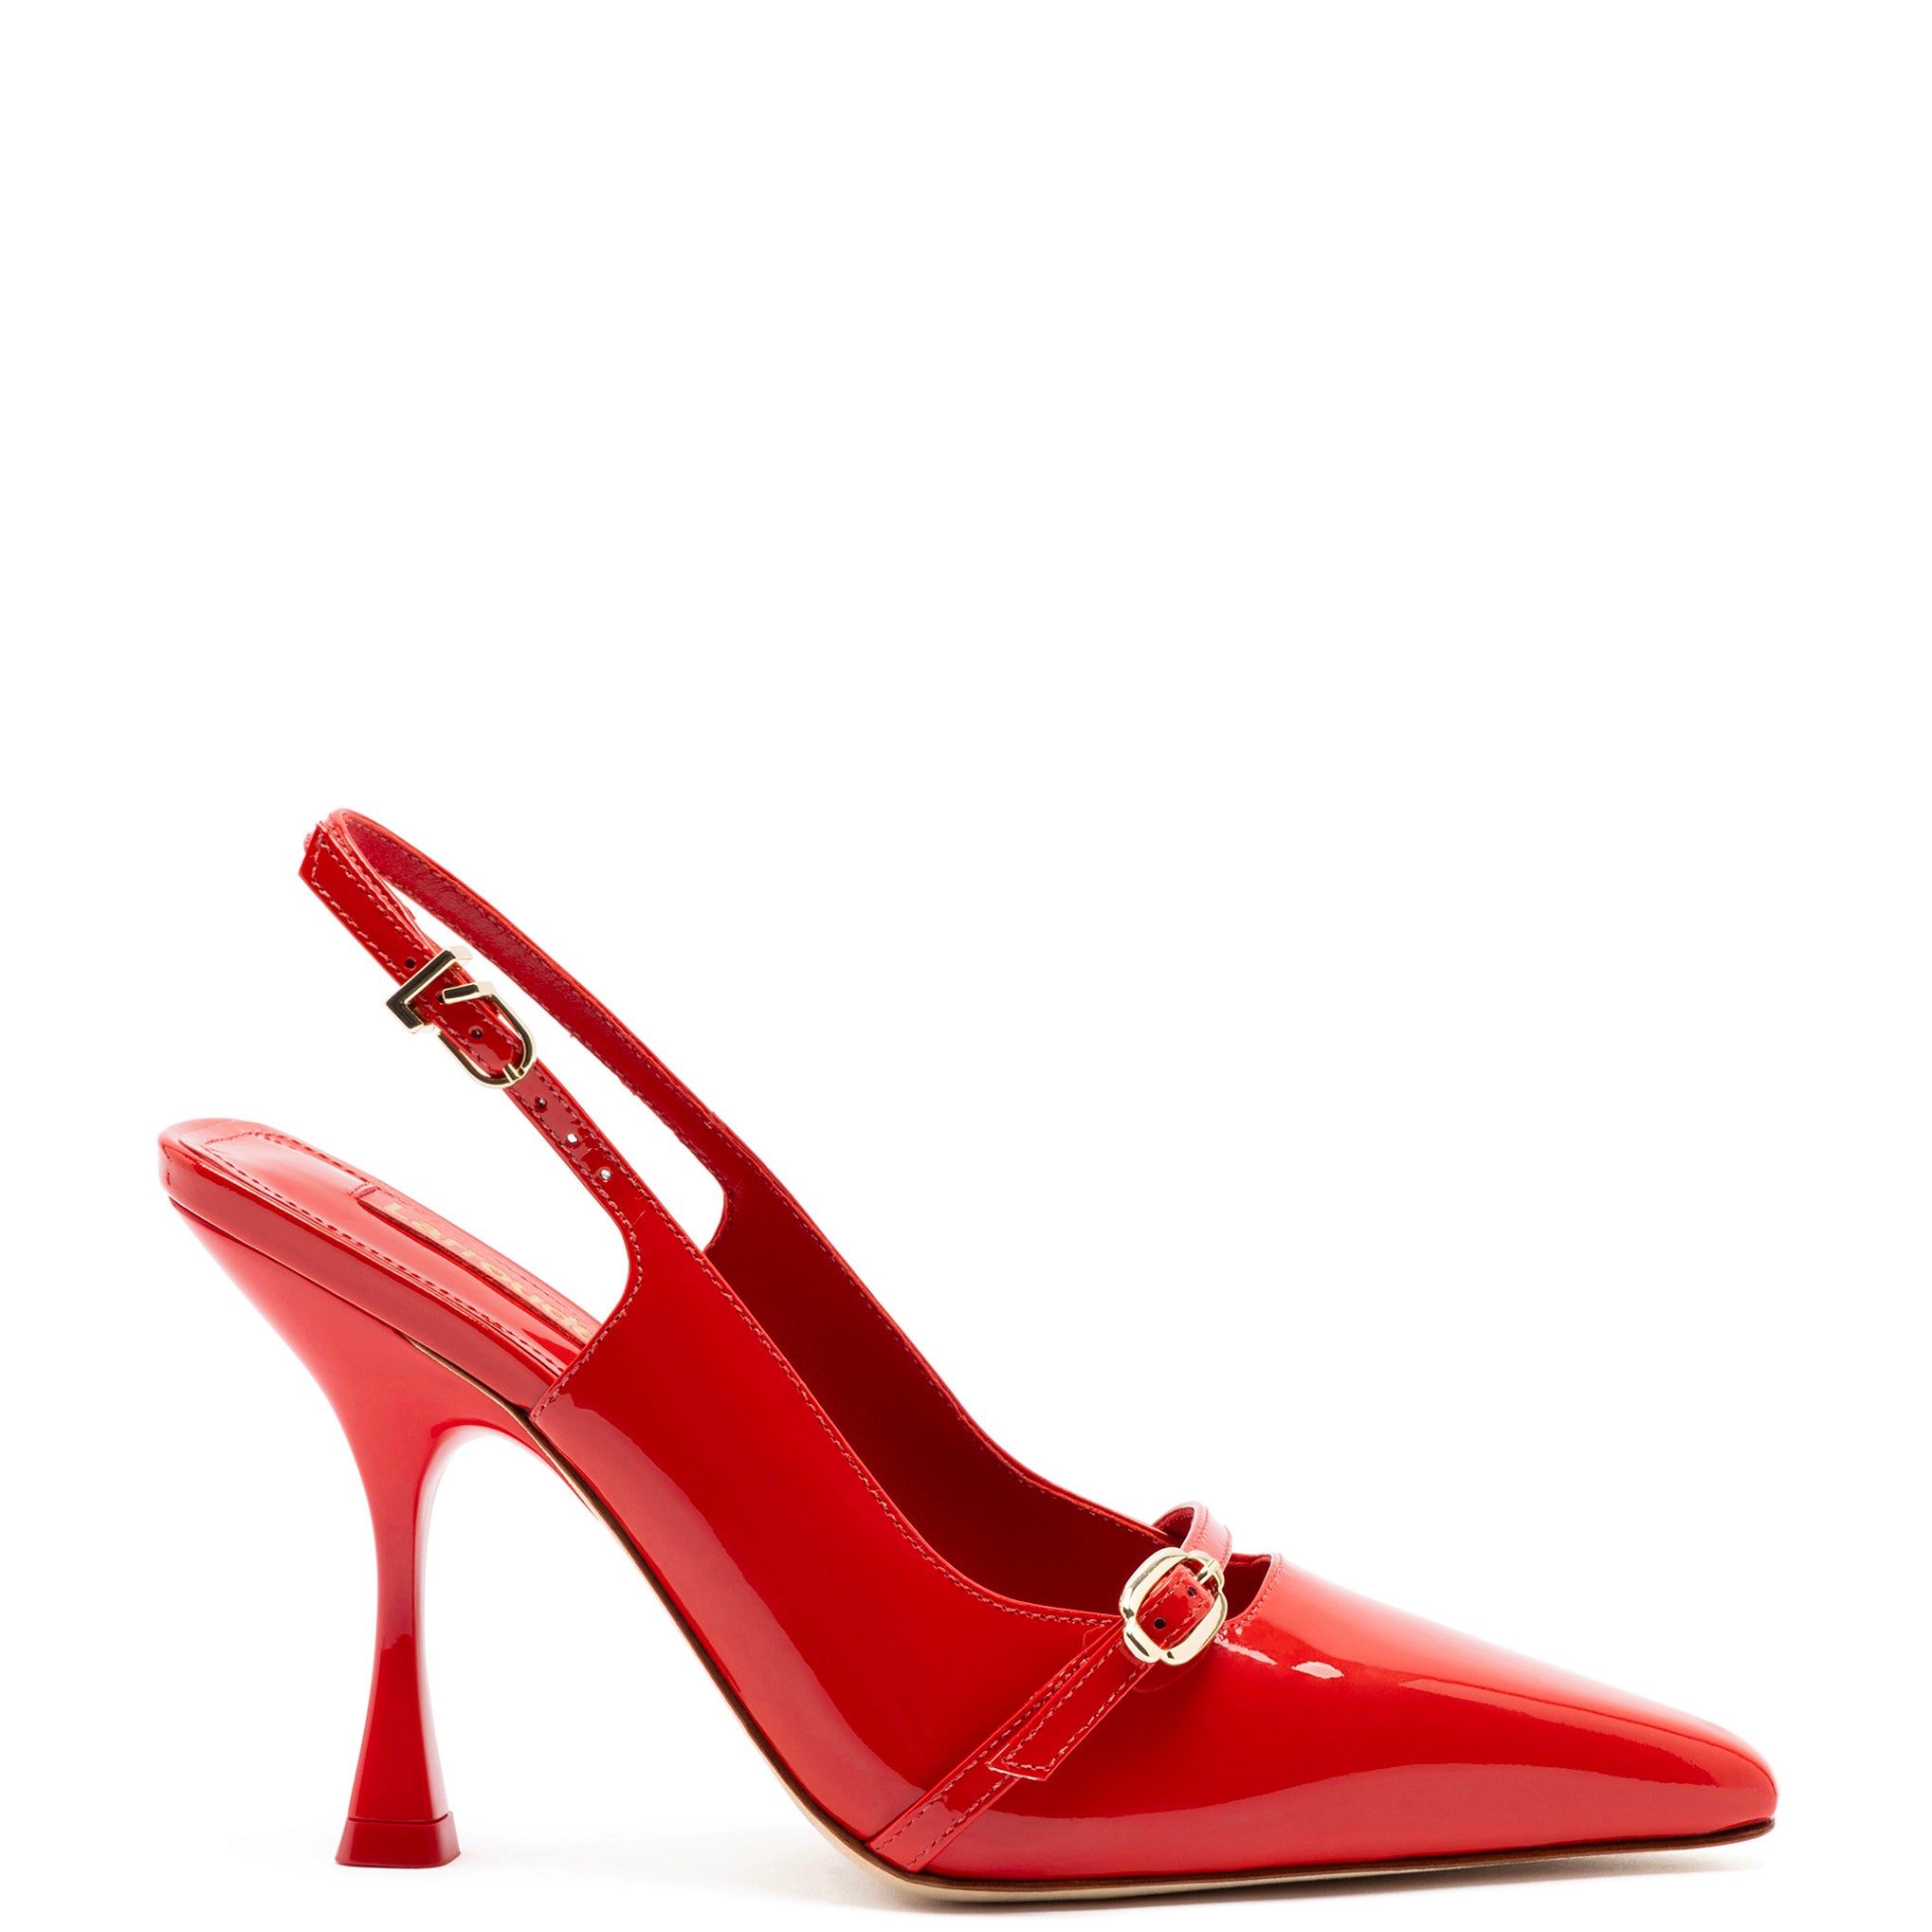 Ines Hi in Scarlet Patent Leather